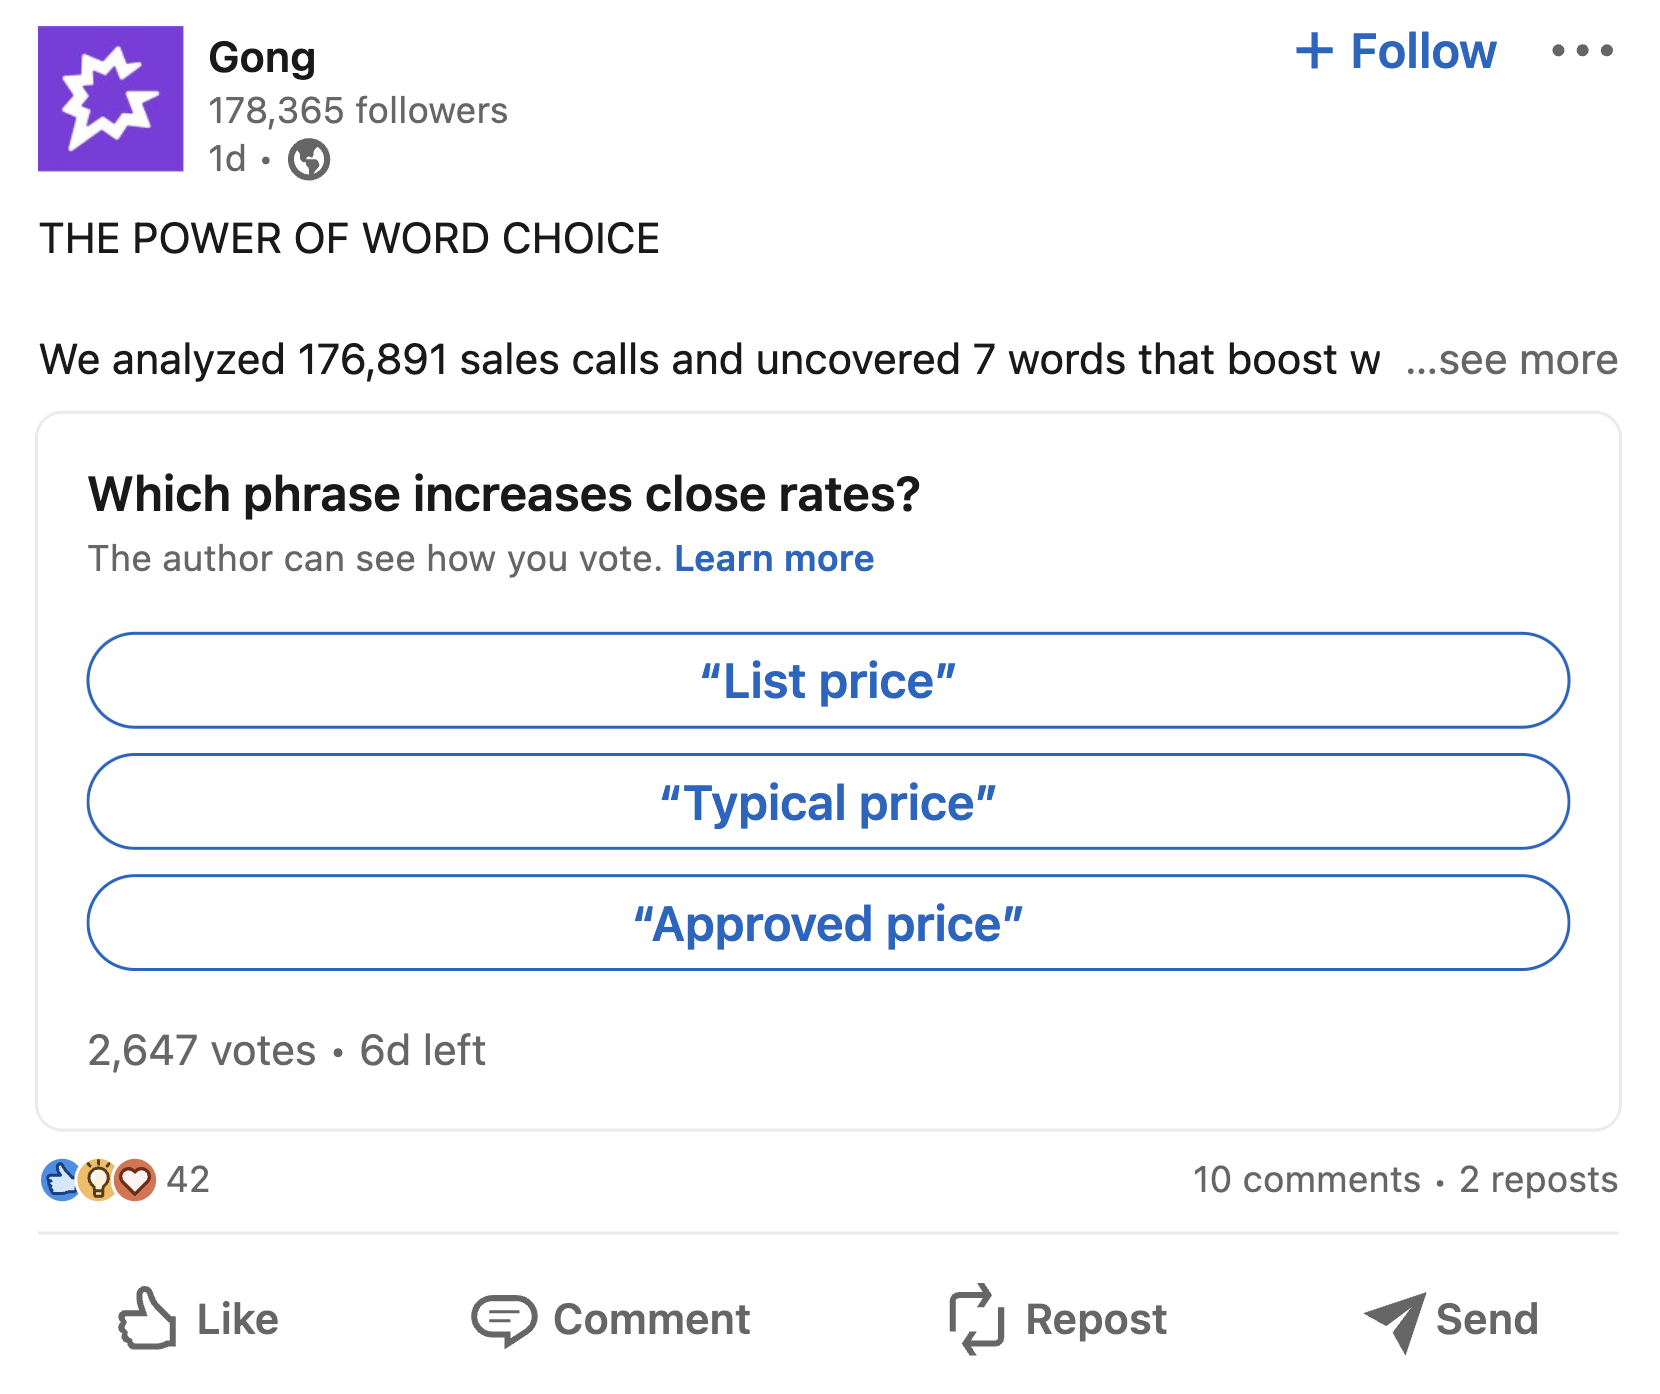 engaging content from gong